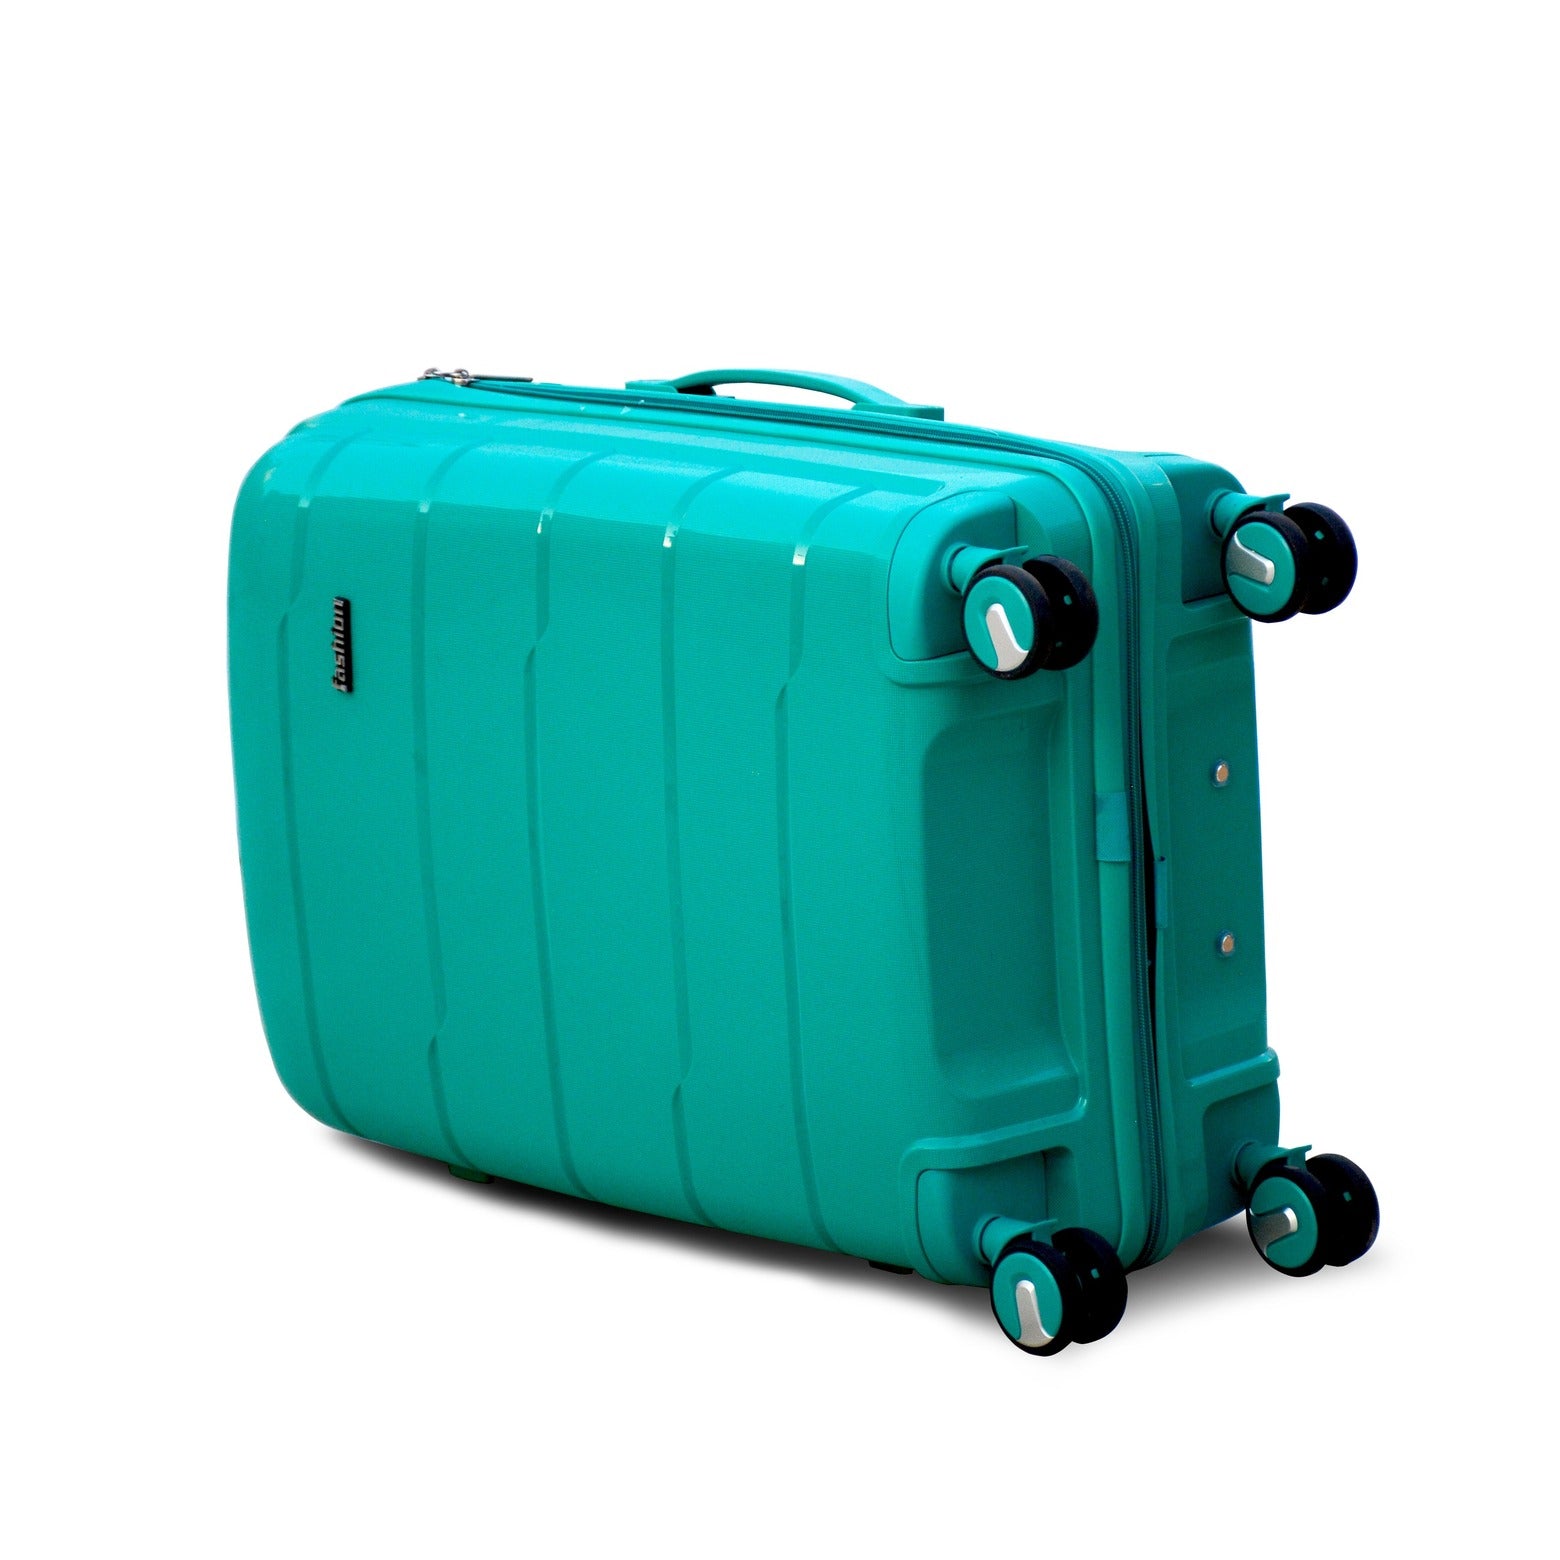 24" Dark Green Colour Ceramic Smooth PP Lightweight Luggage Bag with Double Spinner Wheel